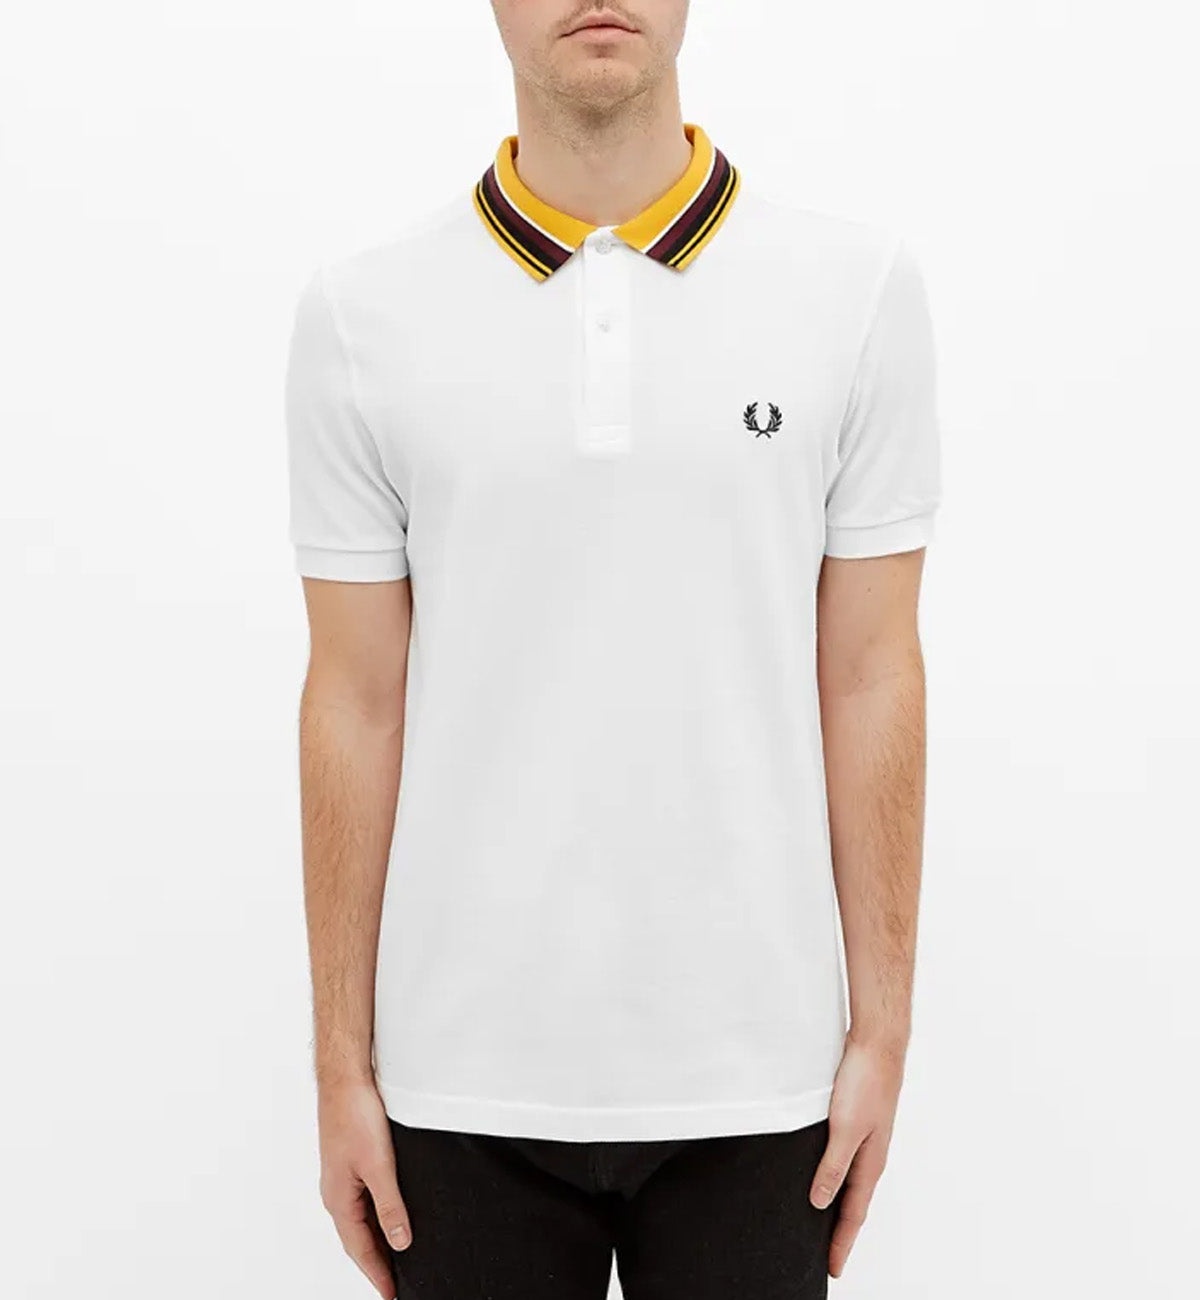 Fred Perry Yellow Black Striped White Polo Shirt